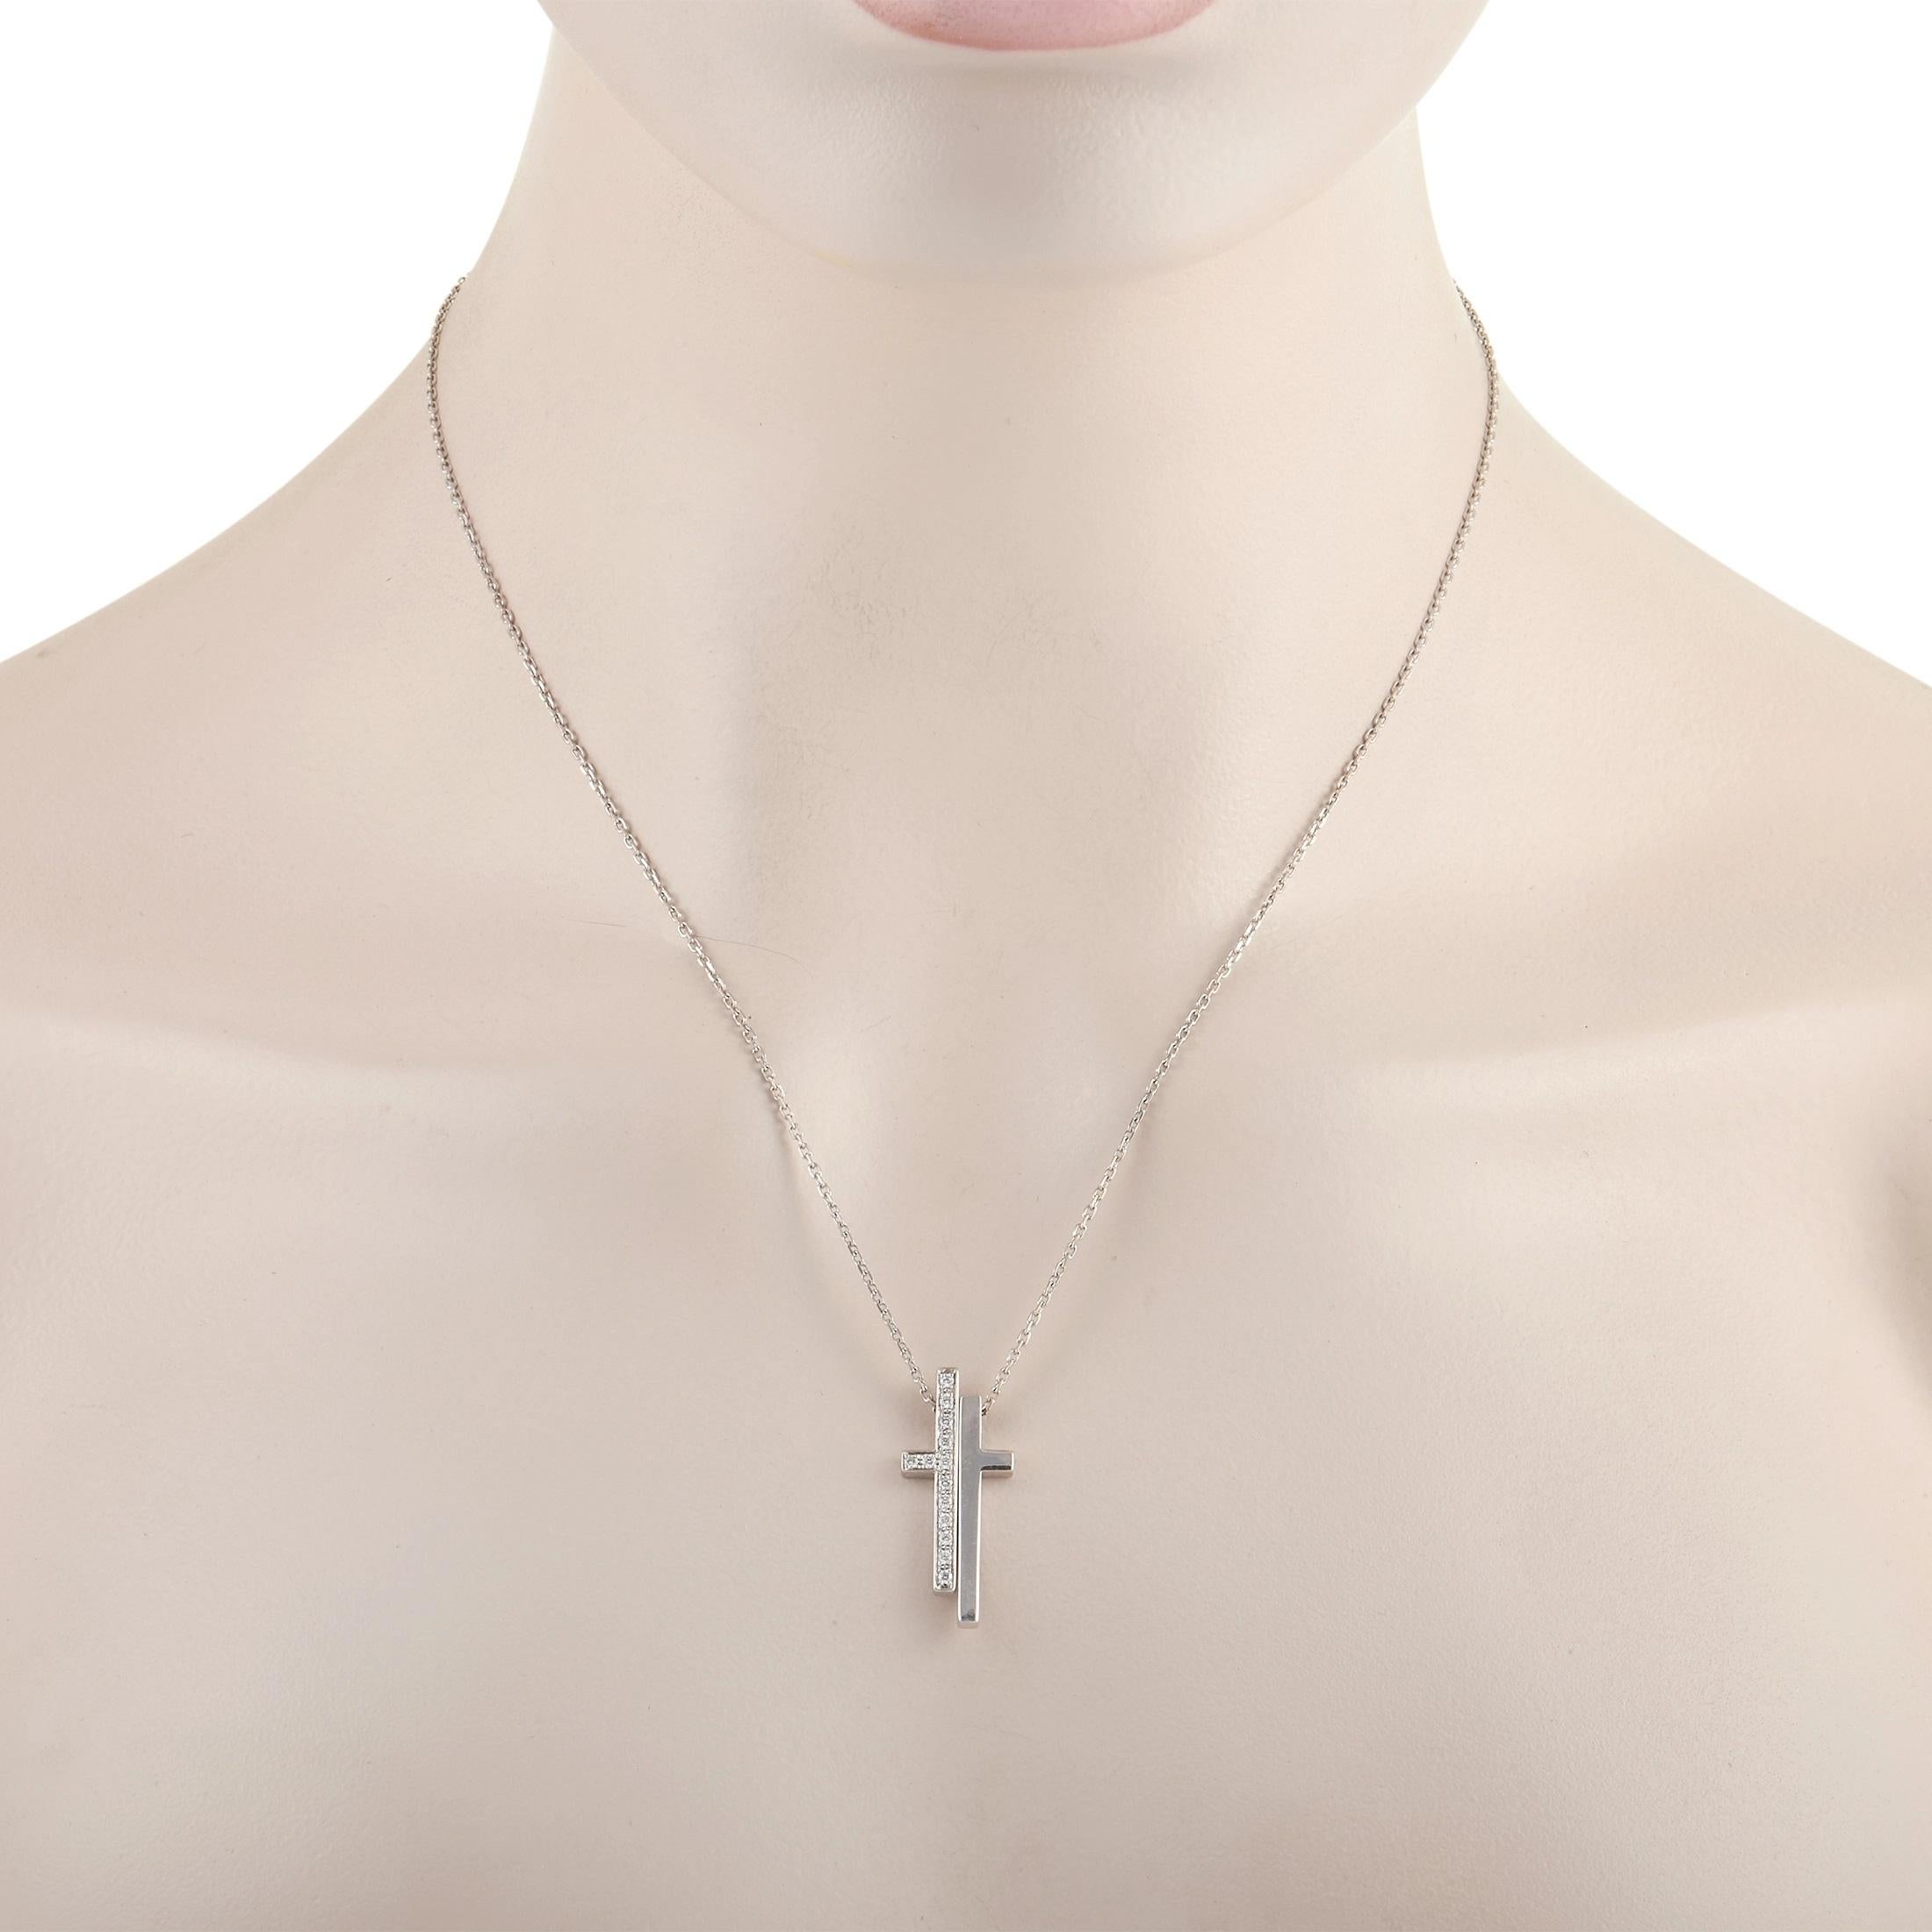 The luxury house Gucci brings a fresh reinterpretation to a classic piece of jewelry when it comes to this impeccably crafted cross necklace. Incredibly creative, this 18K White Gold necklace features an abstract cross-shaped pendant measuring 1.13”